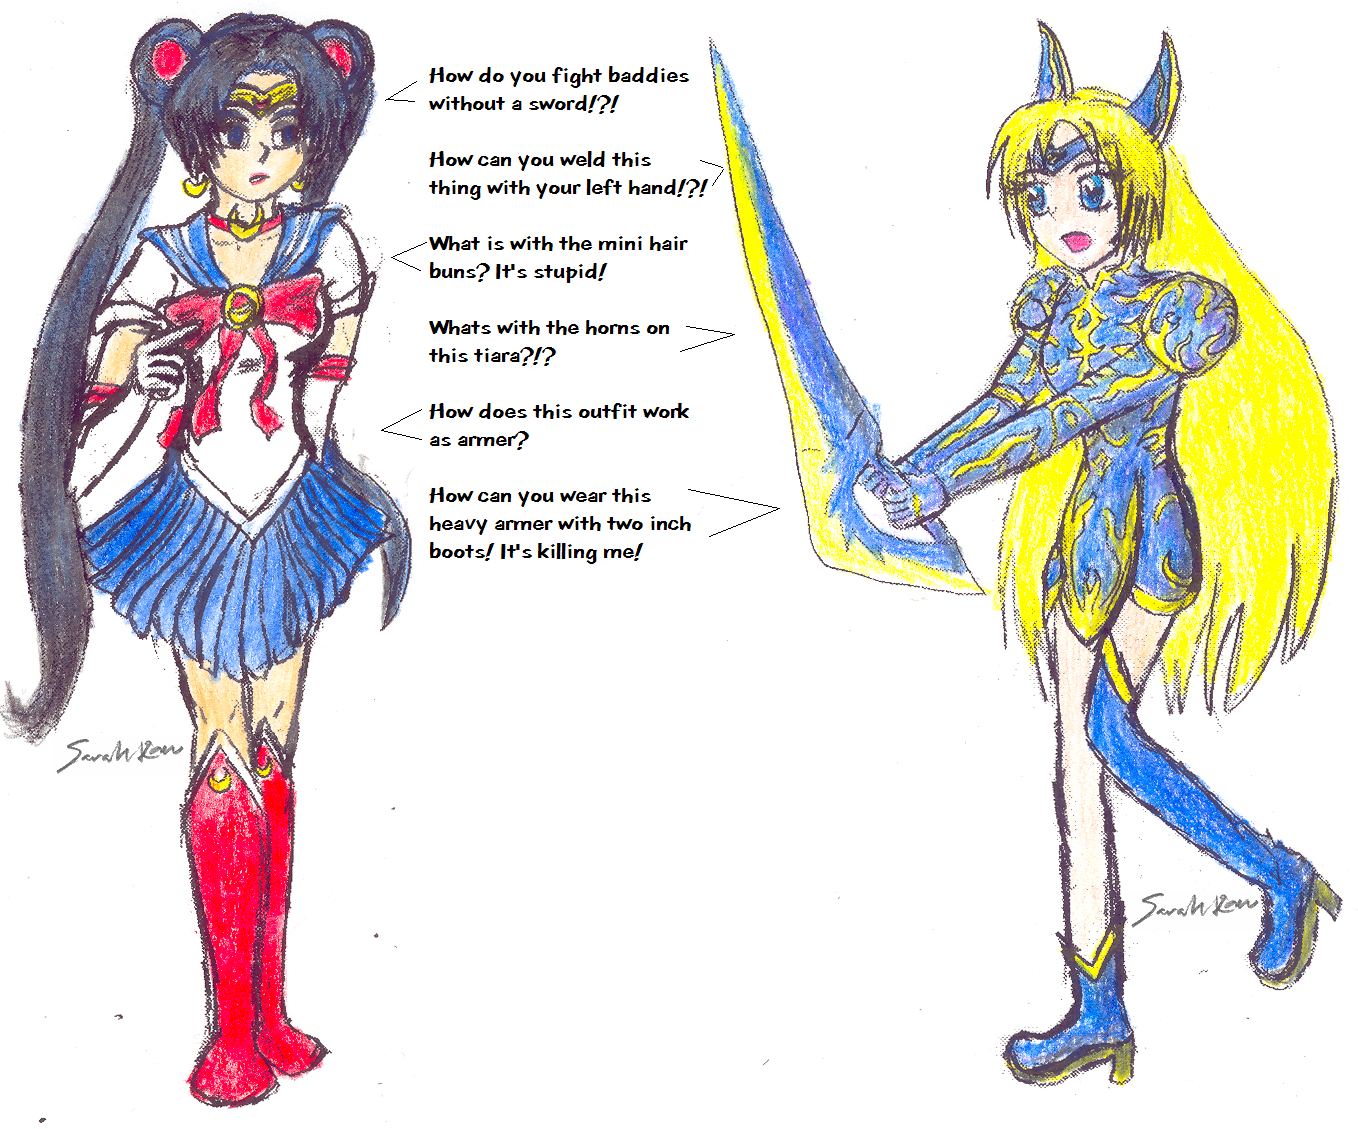 Crossover Sailor Moon and Rose from legend of dragoon by BlA5tFiRe